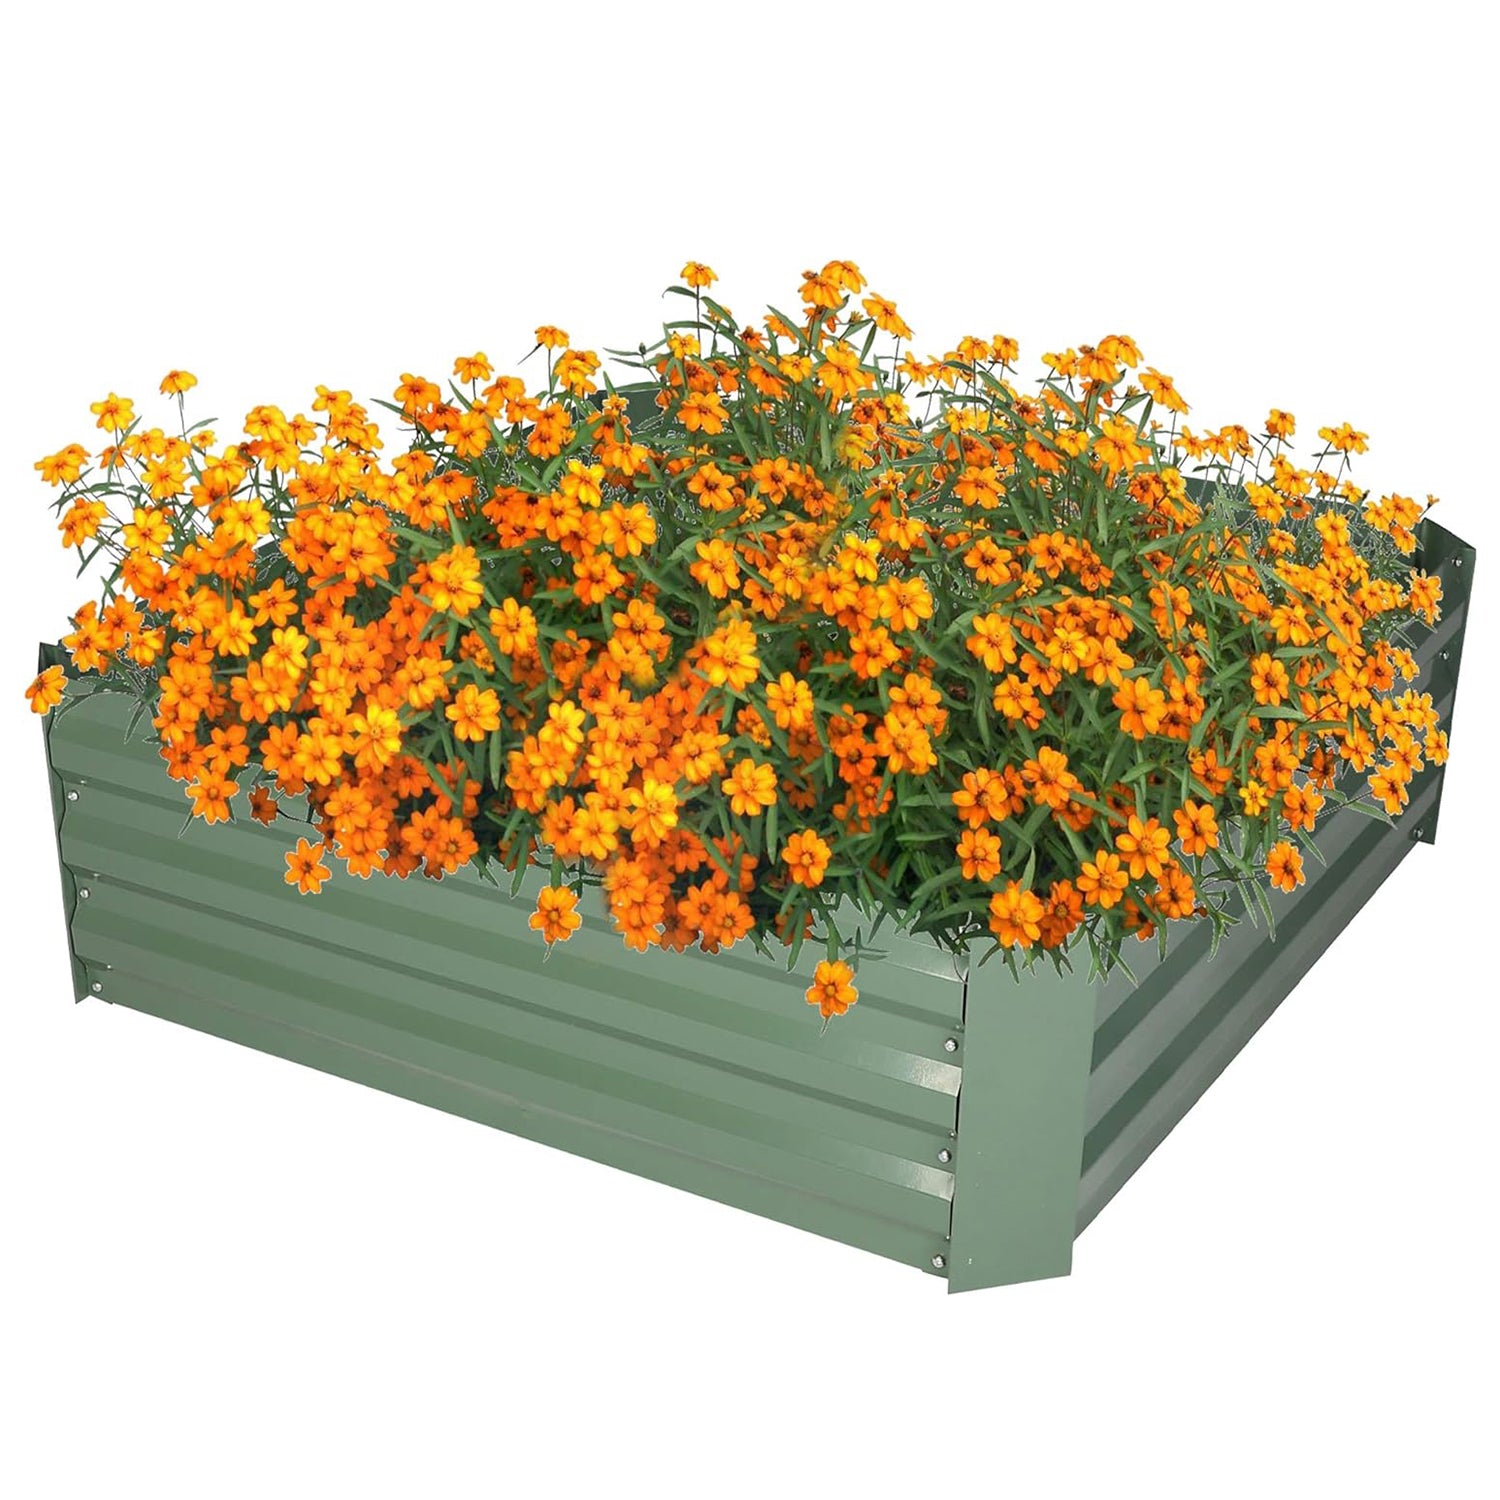 32"x32"x12" Raised Garden Bed Galvanized Planter Box Anti-Rust Coating Planting Vegetables Herbs and Flowers